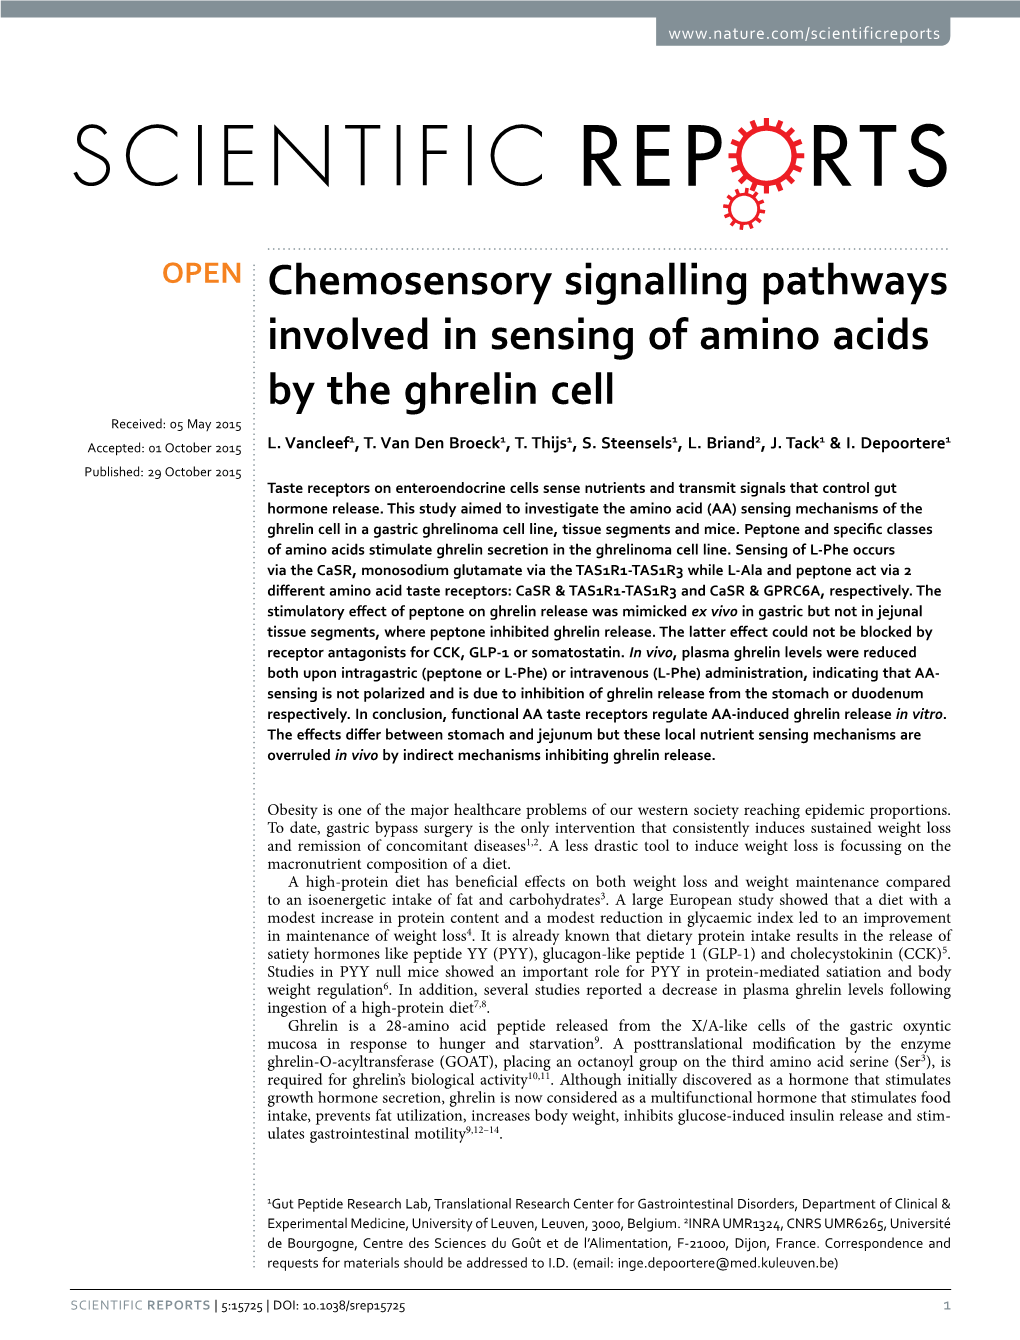 Chemosensory Signalling Pathways Involved in Sensing of Amino Acids by the Ghrelin Cell Received: 05 May 2015 1 1 1 1 2 1 1 Accepted: 01 October 2015 L